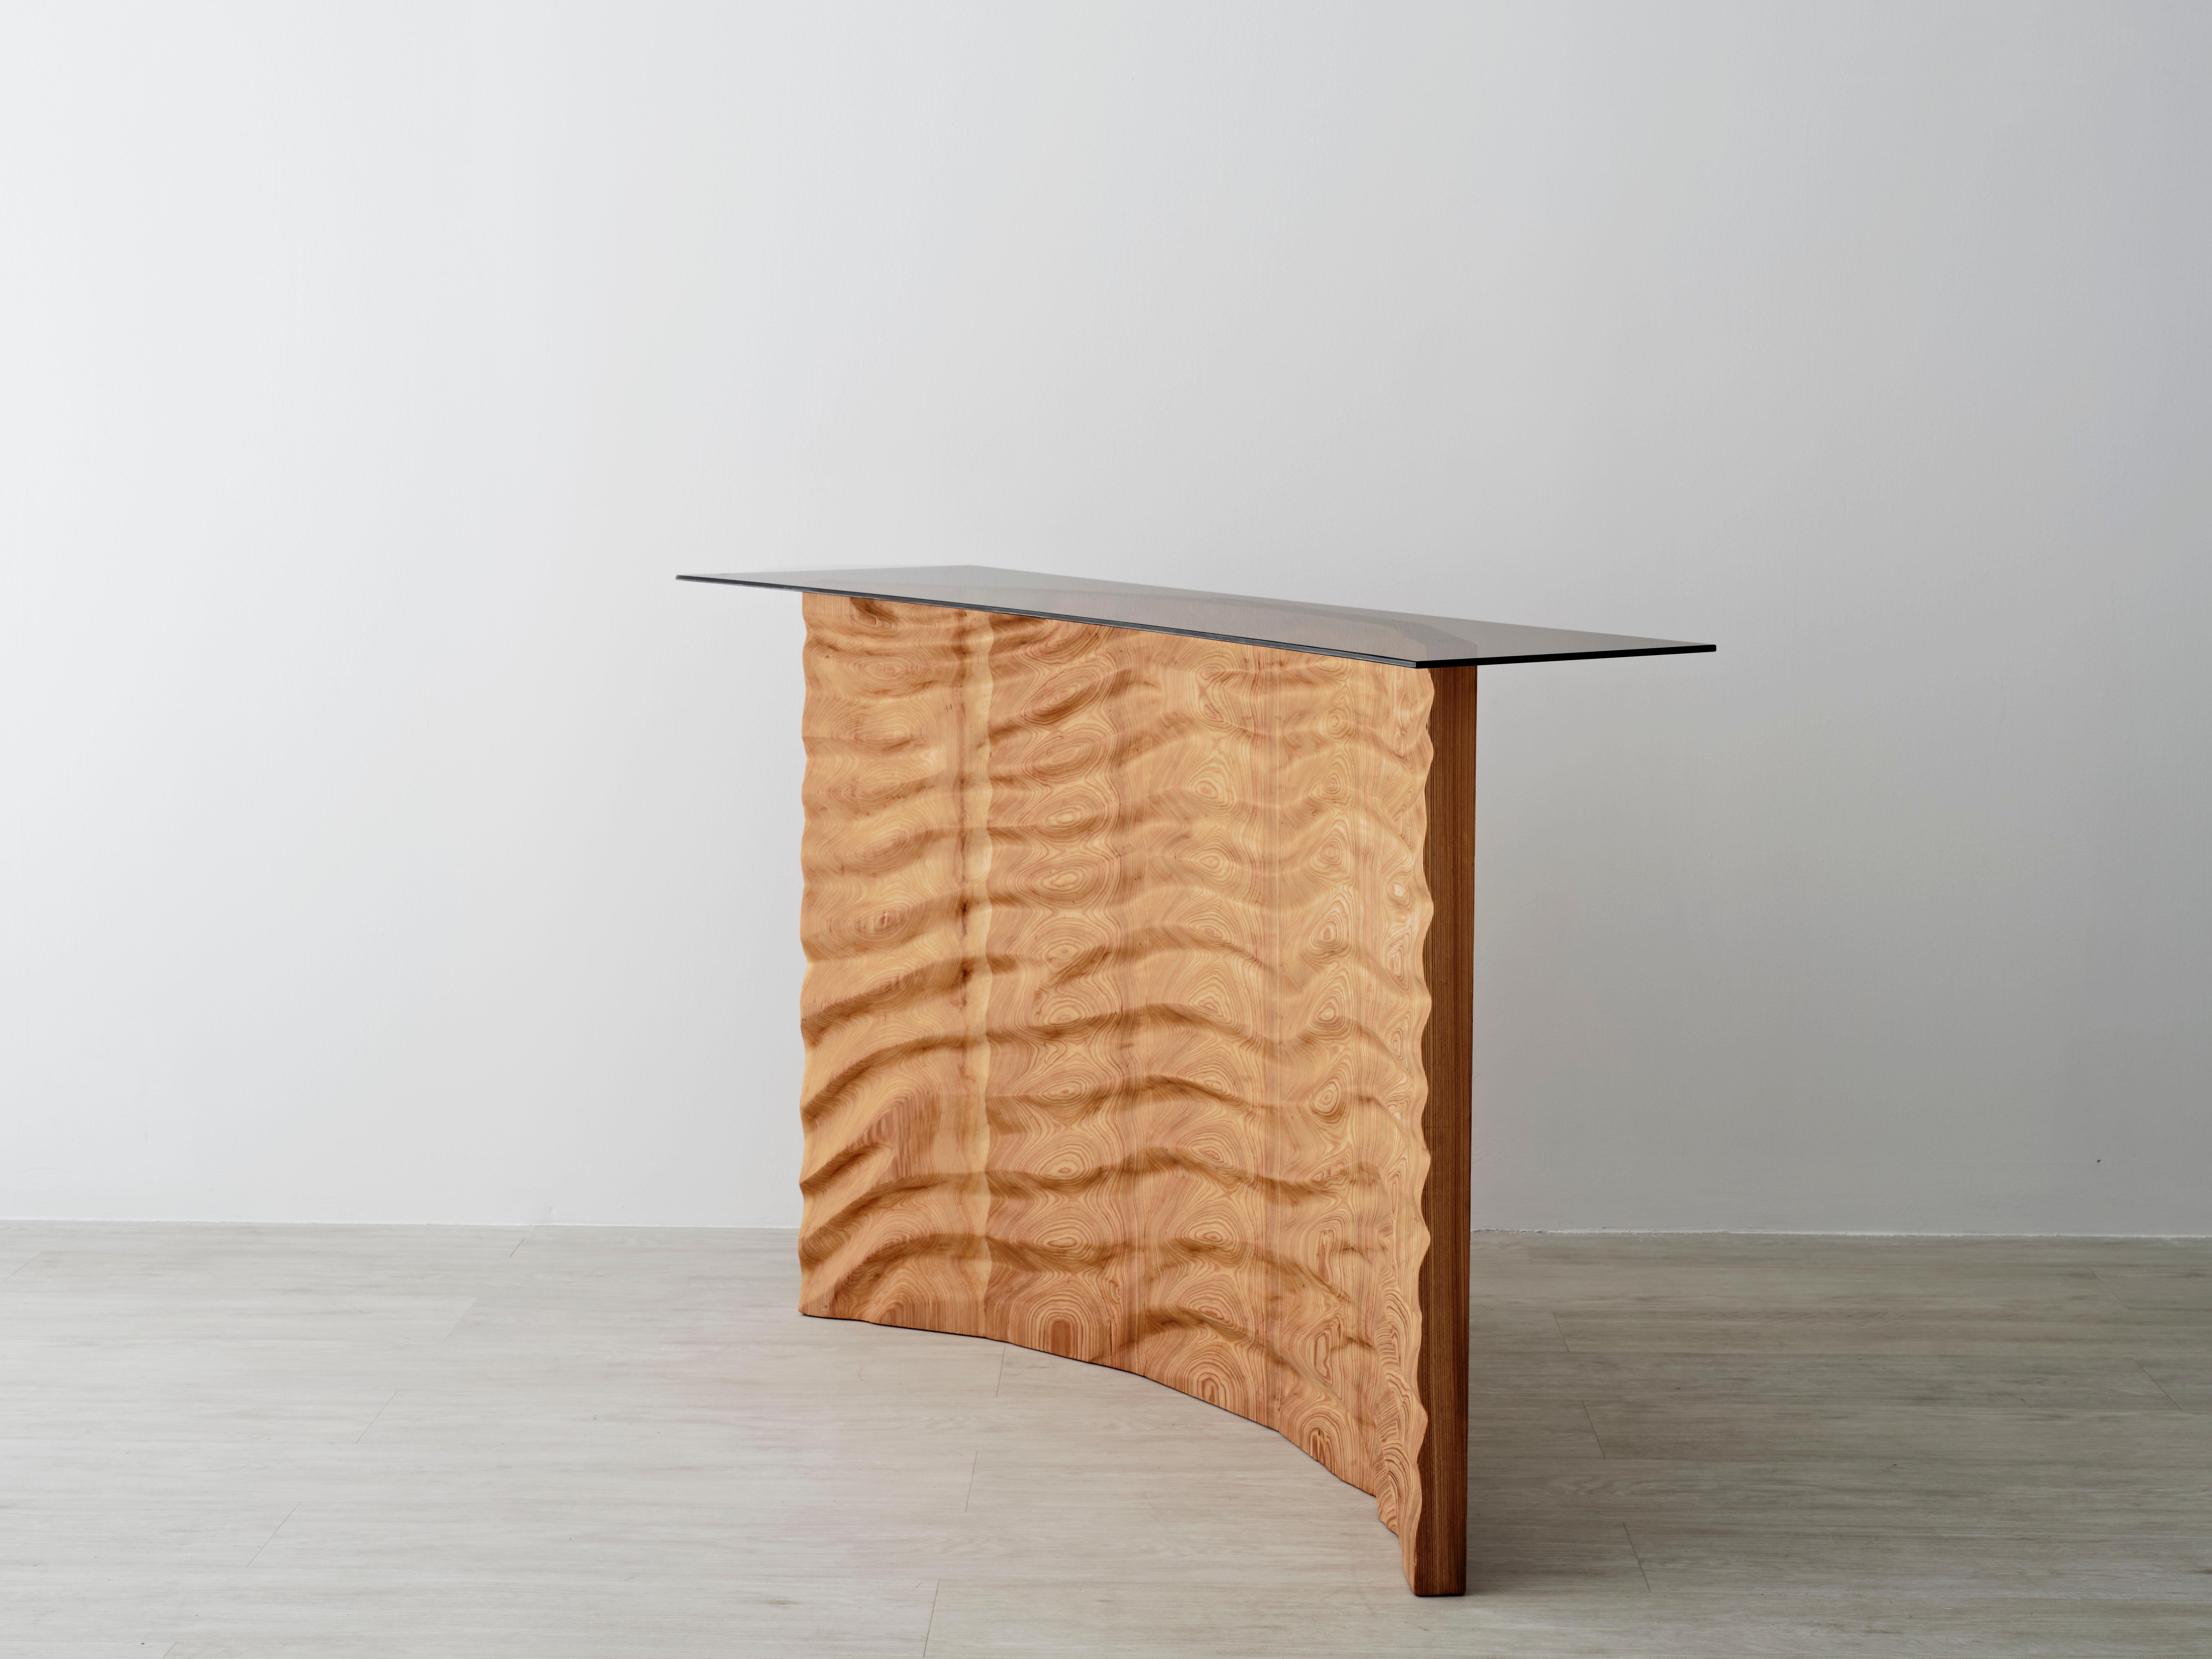 The base of the tides console is a motif hand carved in solid wood (cypress pictured). The choice to carve by hand and without the assistance of computer-guided technology renders a unique numbered piece with each commission. The motif responds to